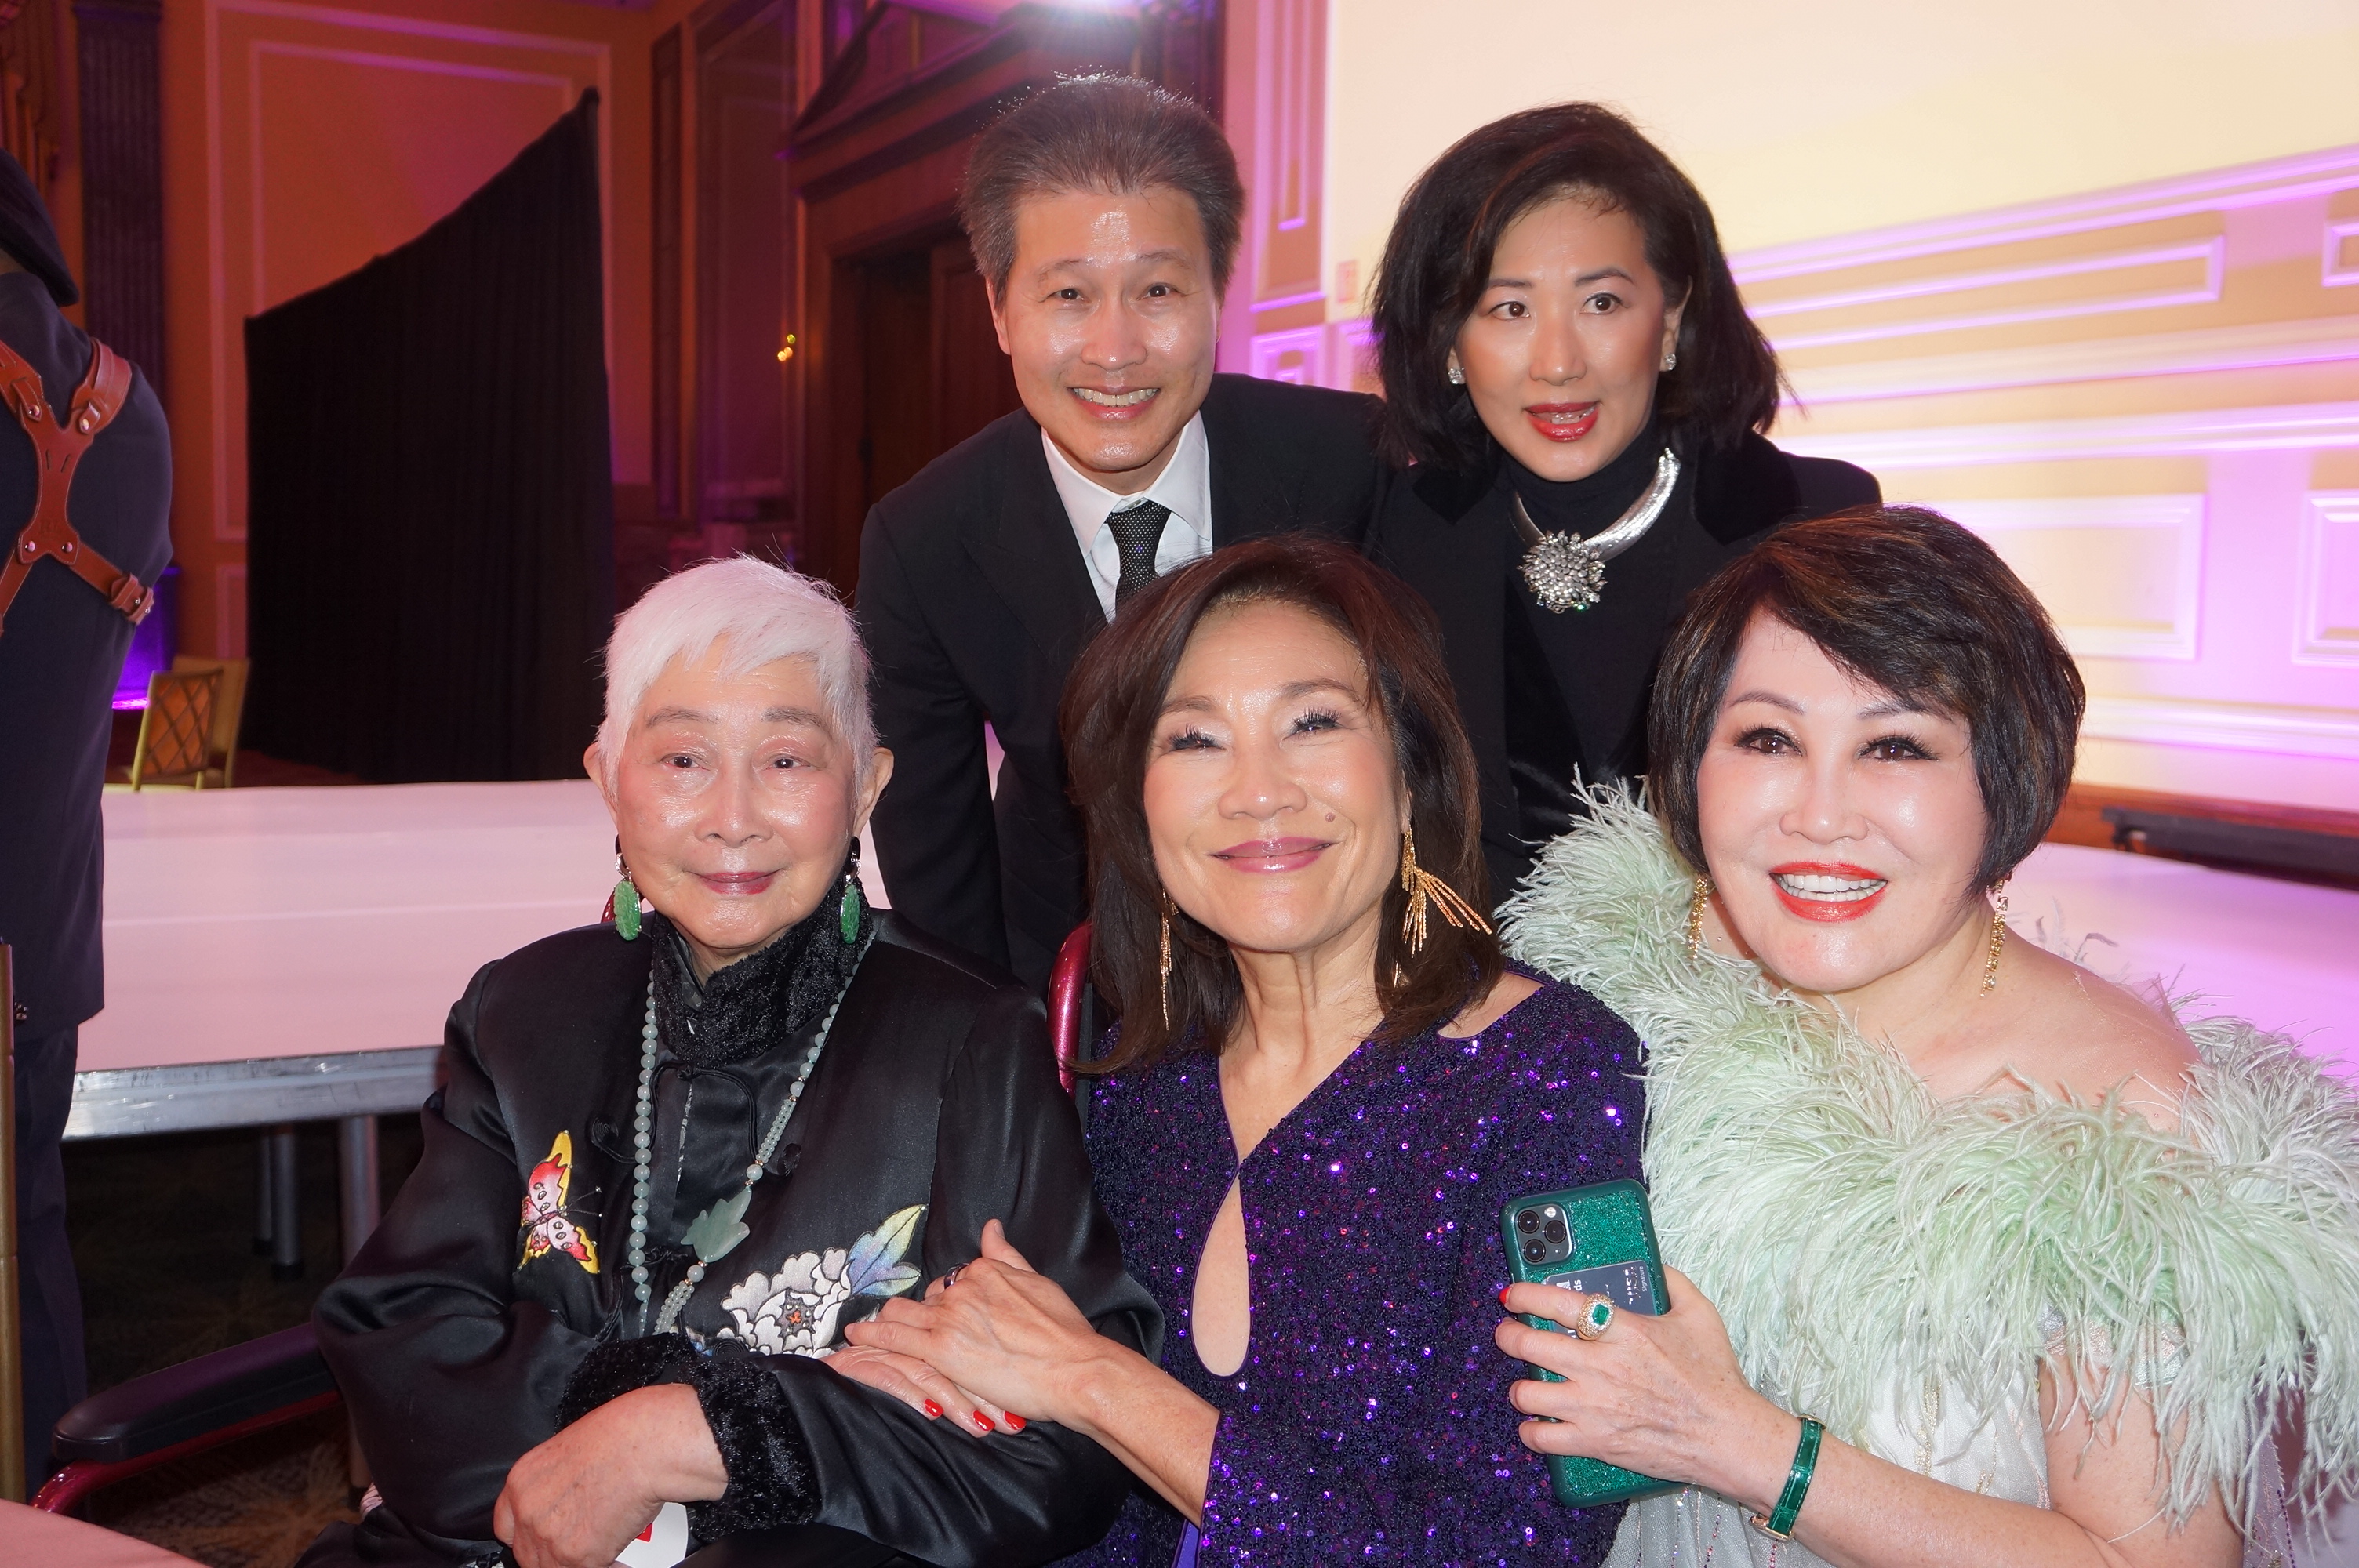 Celebrating Asian Women American Pioneers: The 3rd Annual Outstanding Women Who Dared Gala Honors Trailblazers